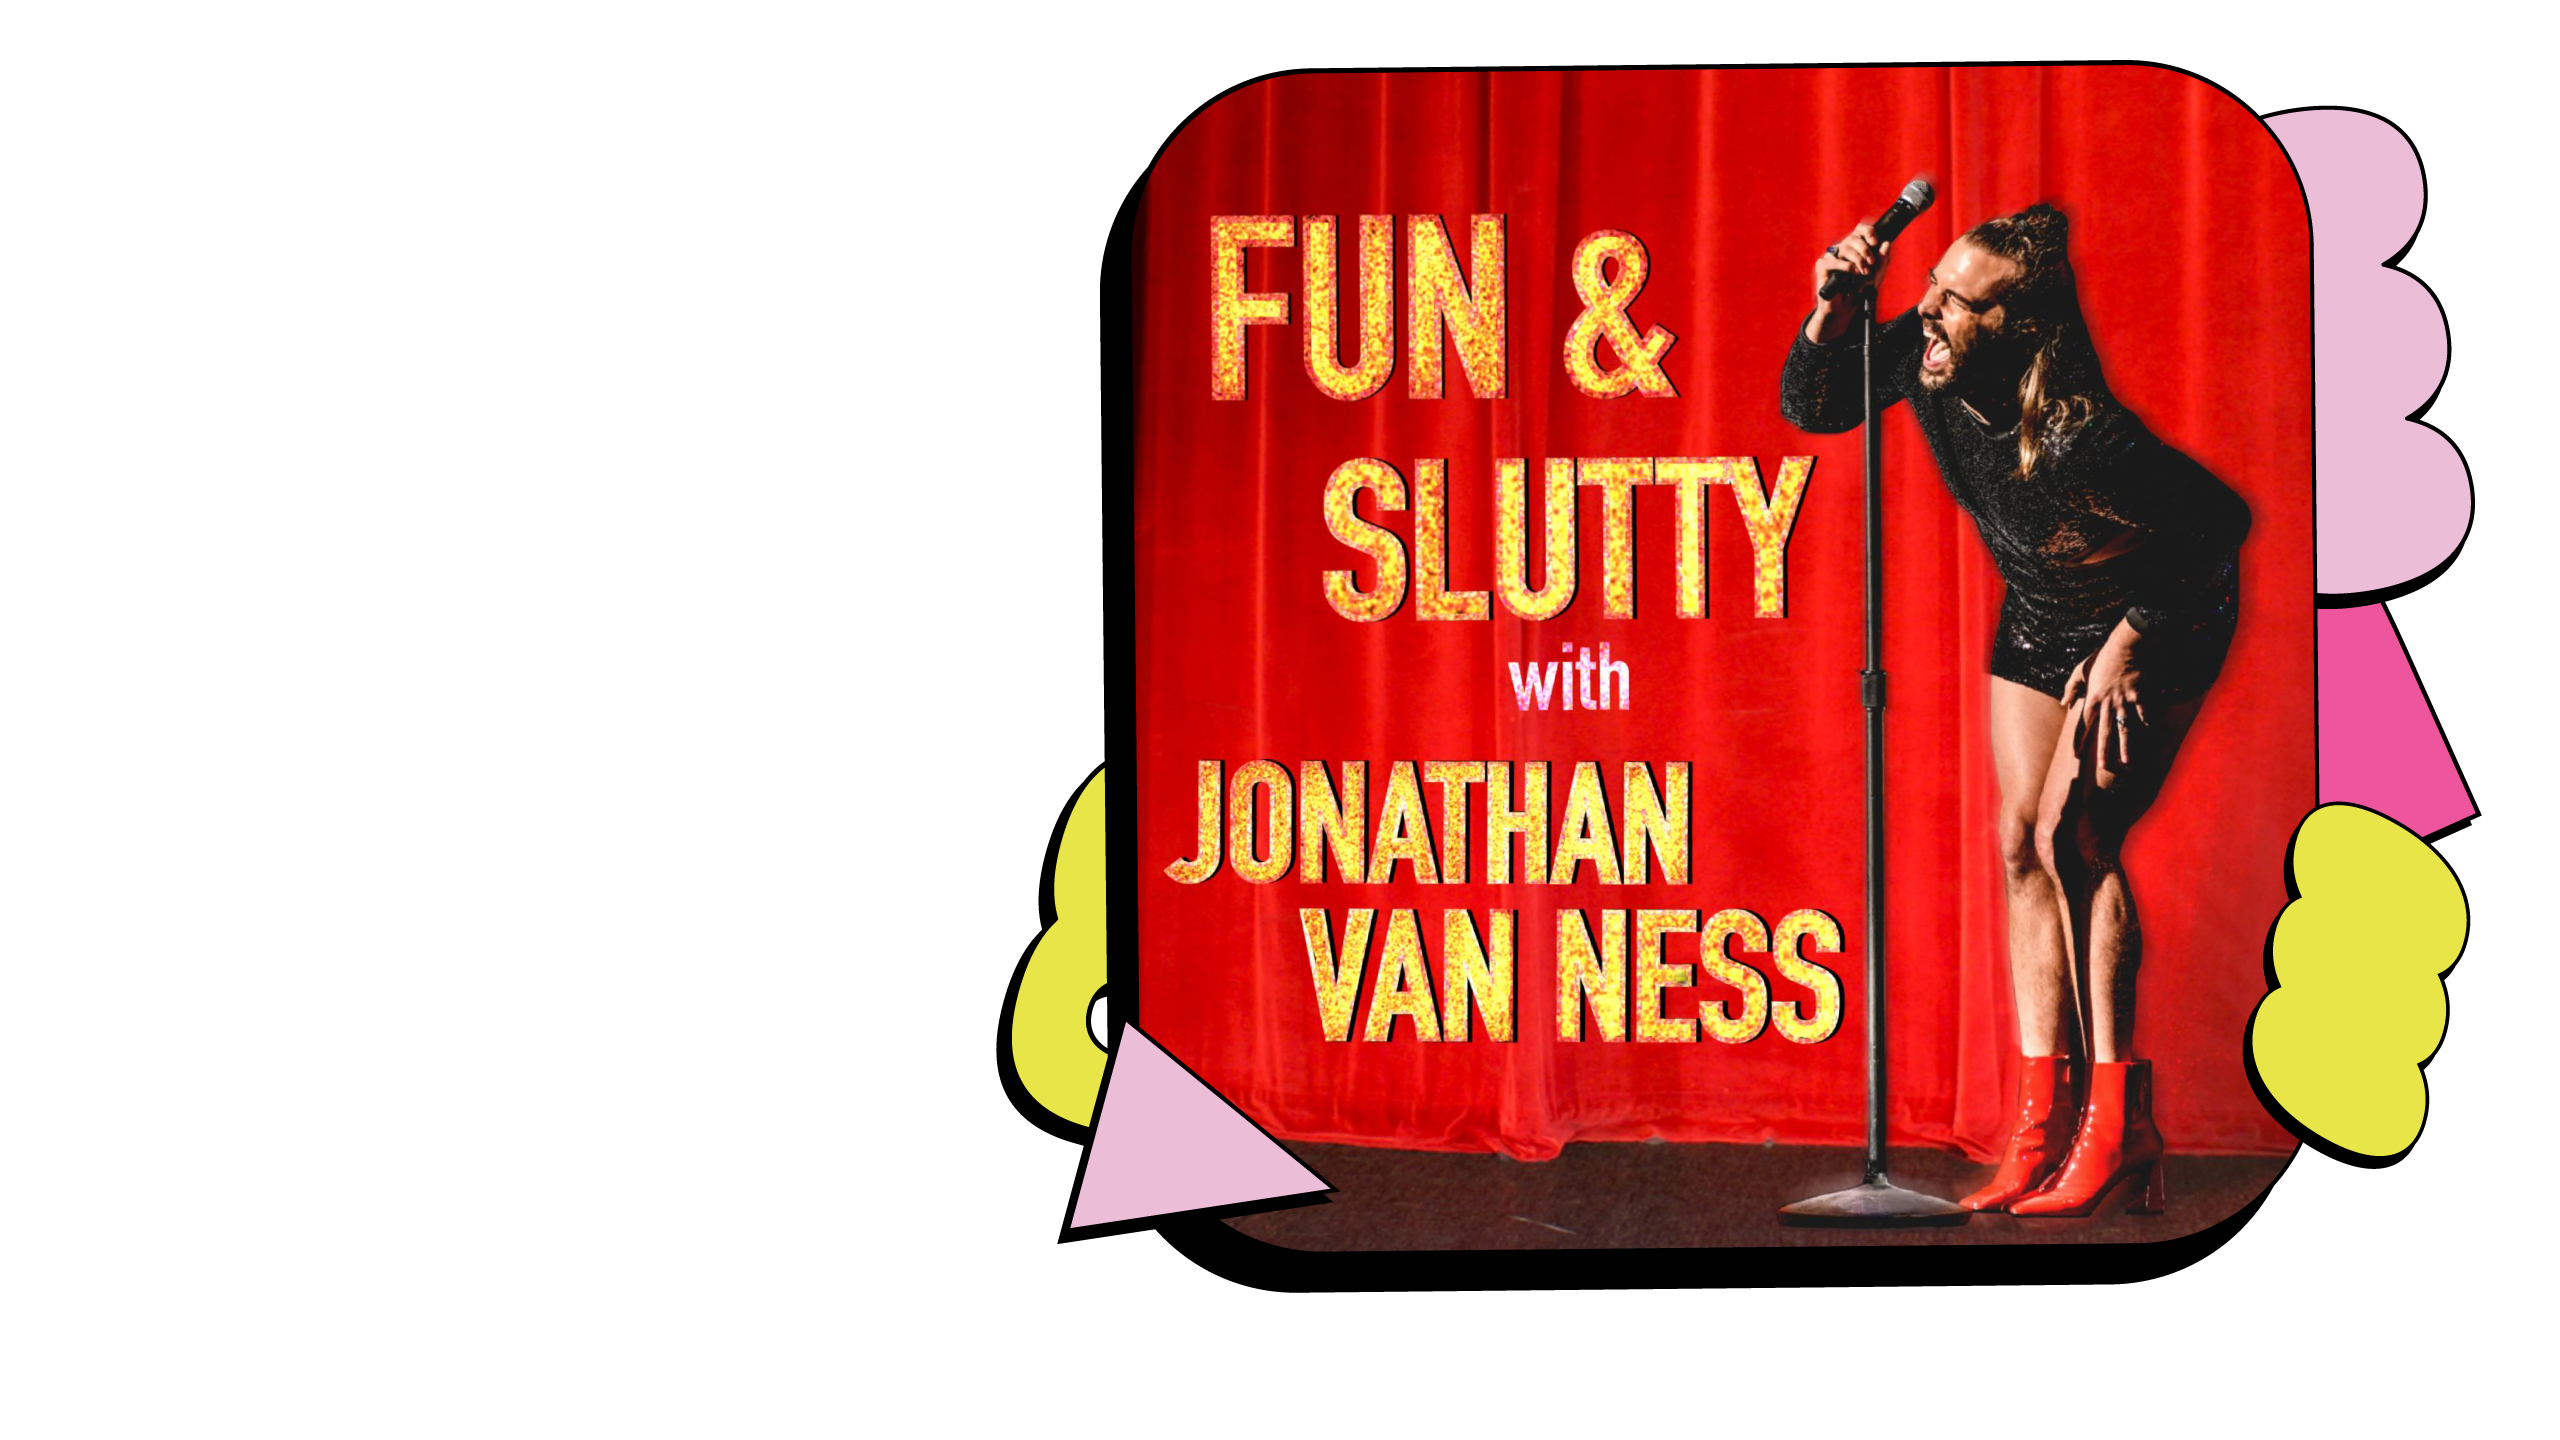 Promotional image for Fun & Slutty with Jonathan Van Ness